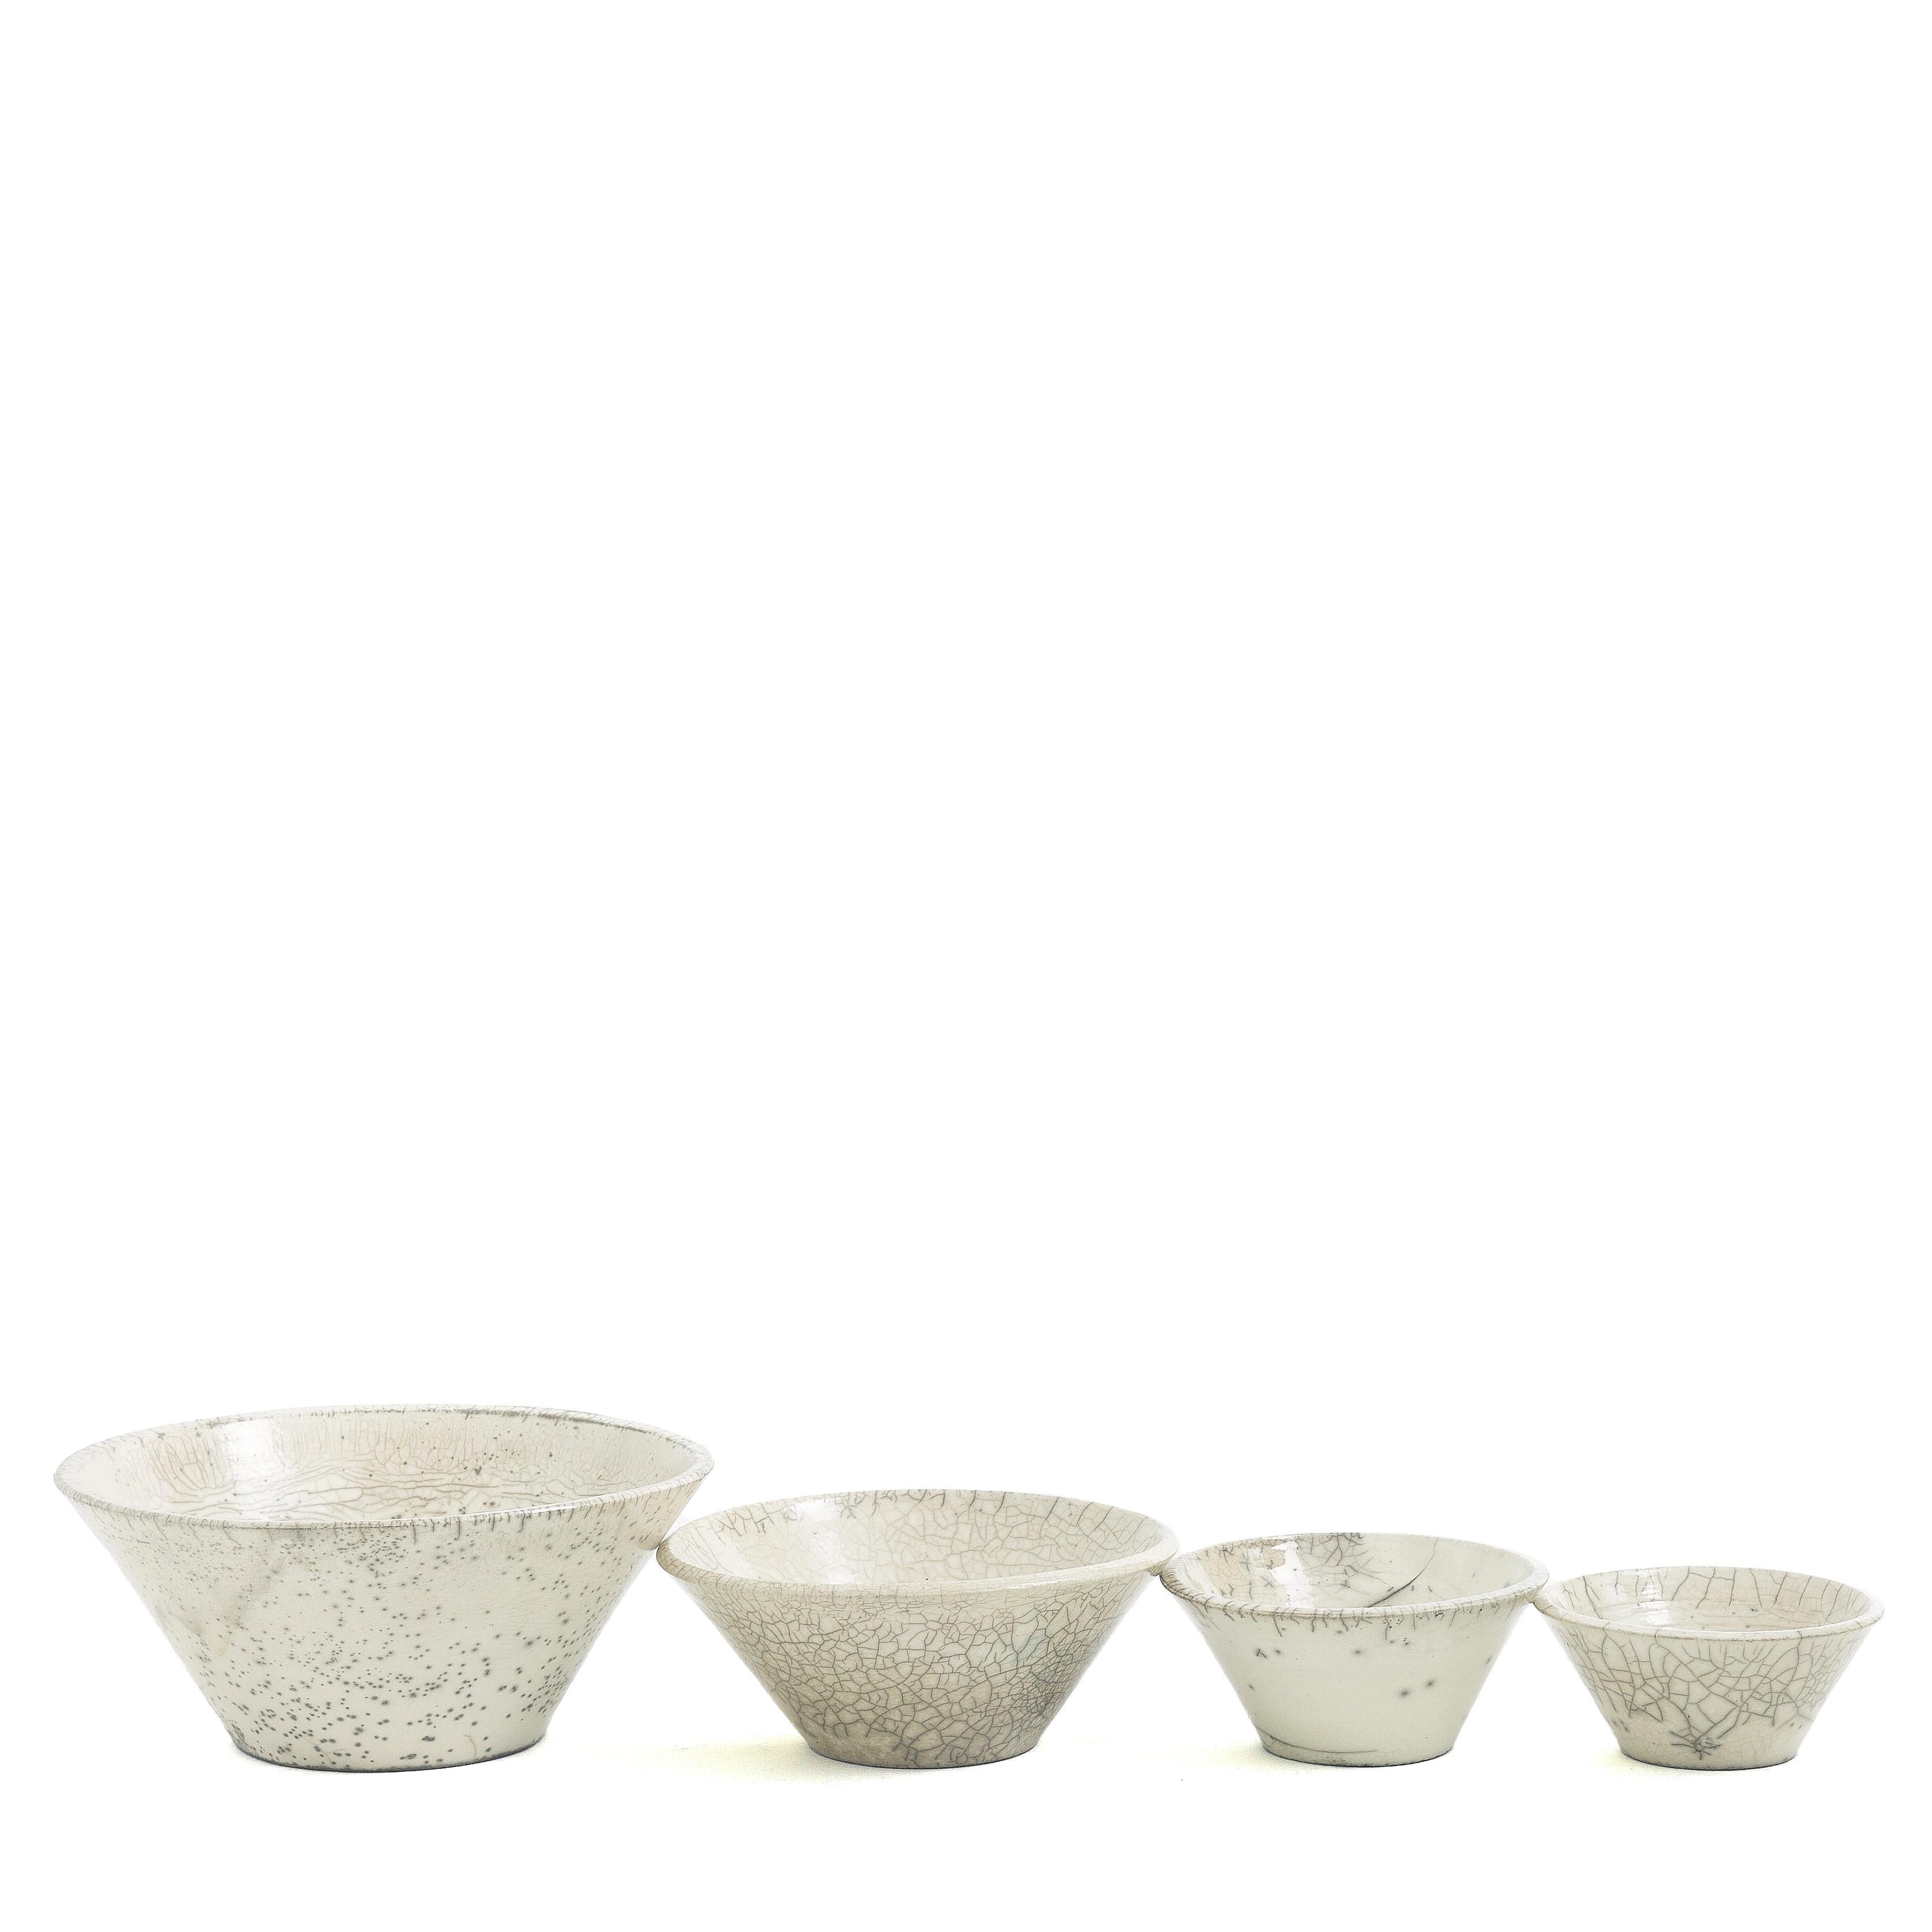 Moon set of 4 bowls


A sophisticated complement to any decor, this set of four bowls owes its distinctive crackles - creating unpredictable traceries varying from piece to piece - to a scrupulous following of the ancient Japanese technique of